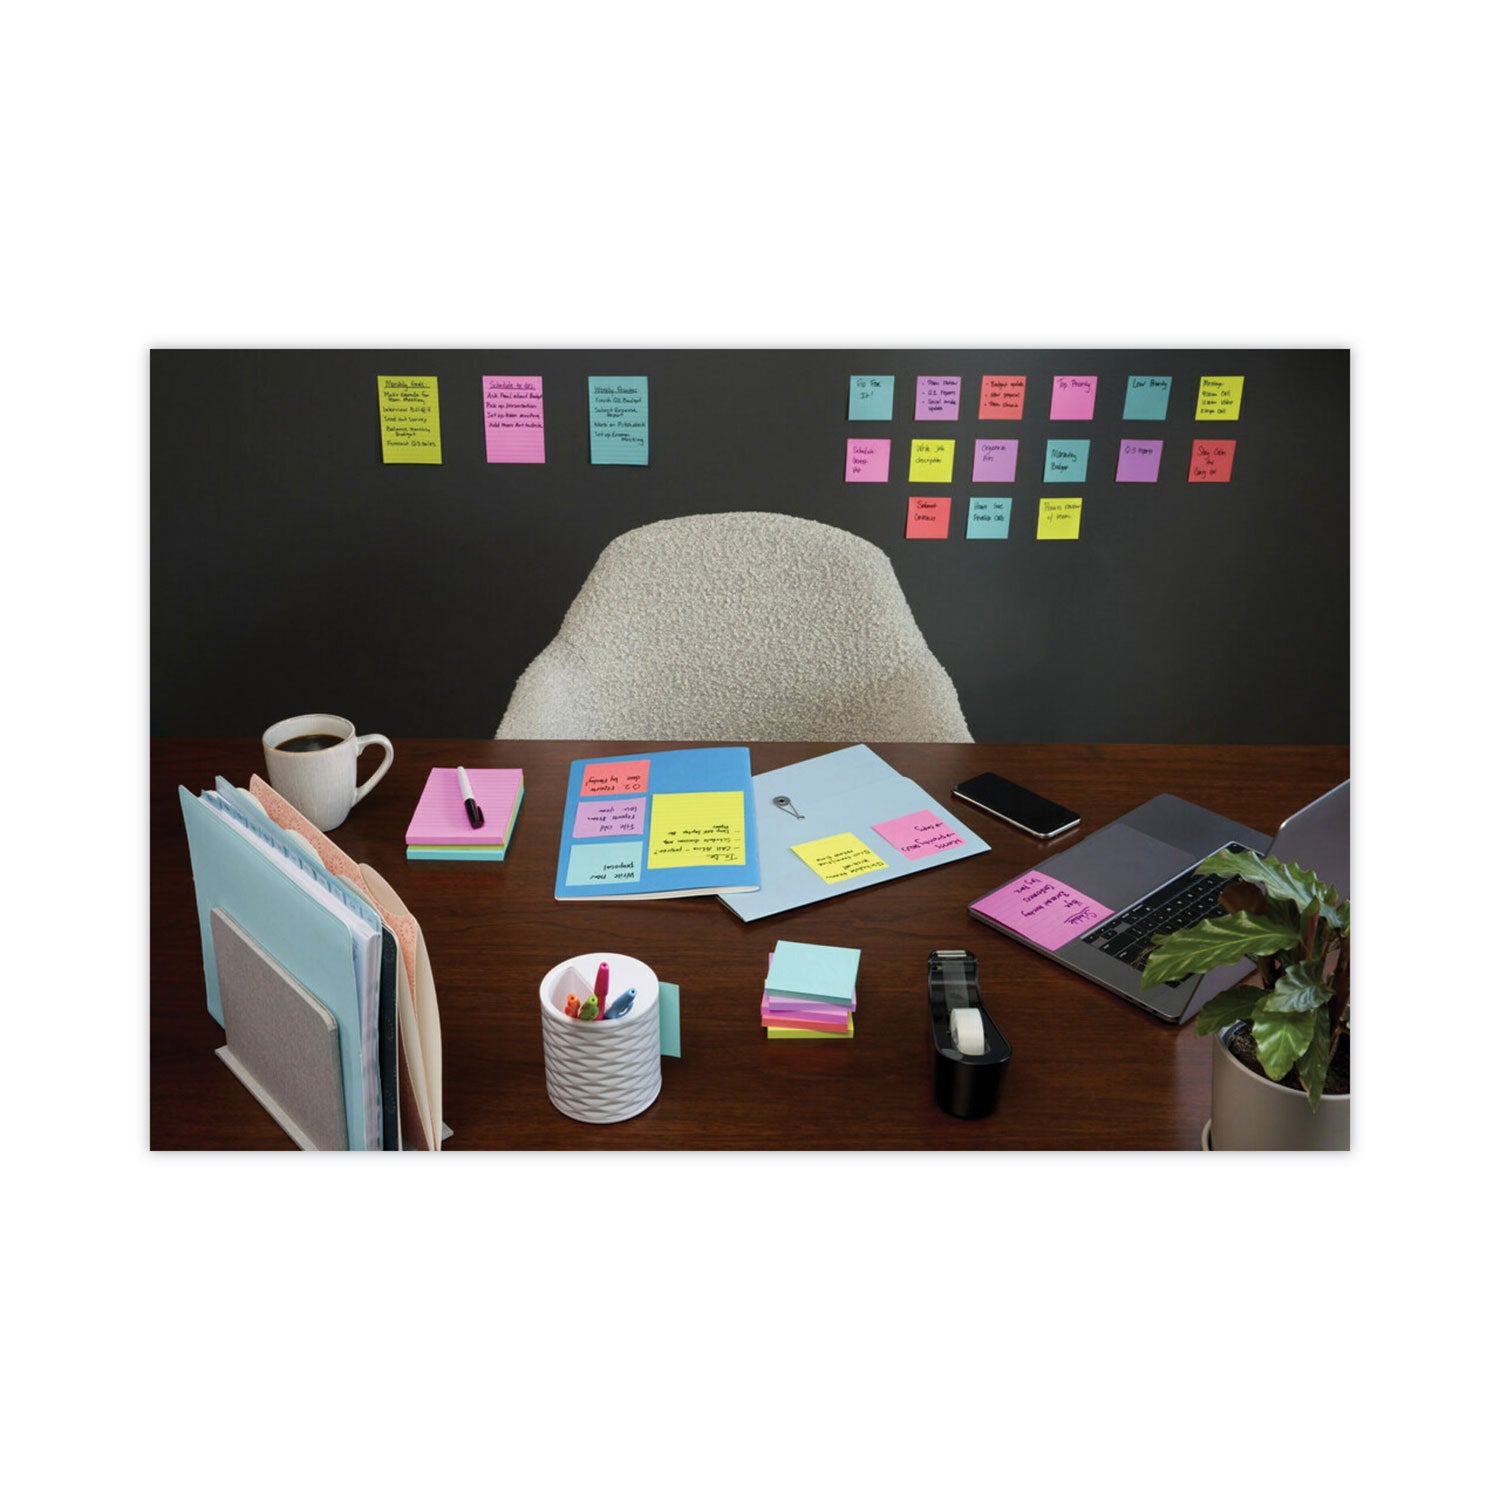 pop-up-3-x-3-note-refill-3-x-3-supernova-neons-collection-colors-90-sheets-pad-6-pads-pack_mmmr3306ssmia - 8